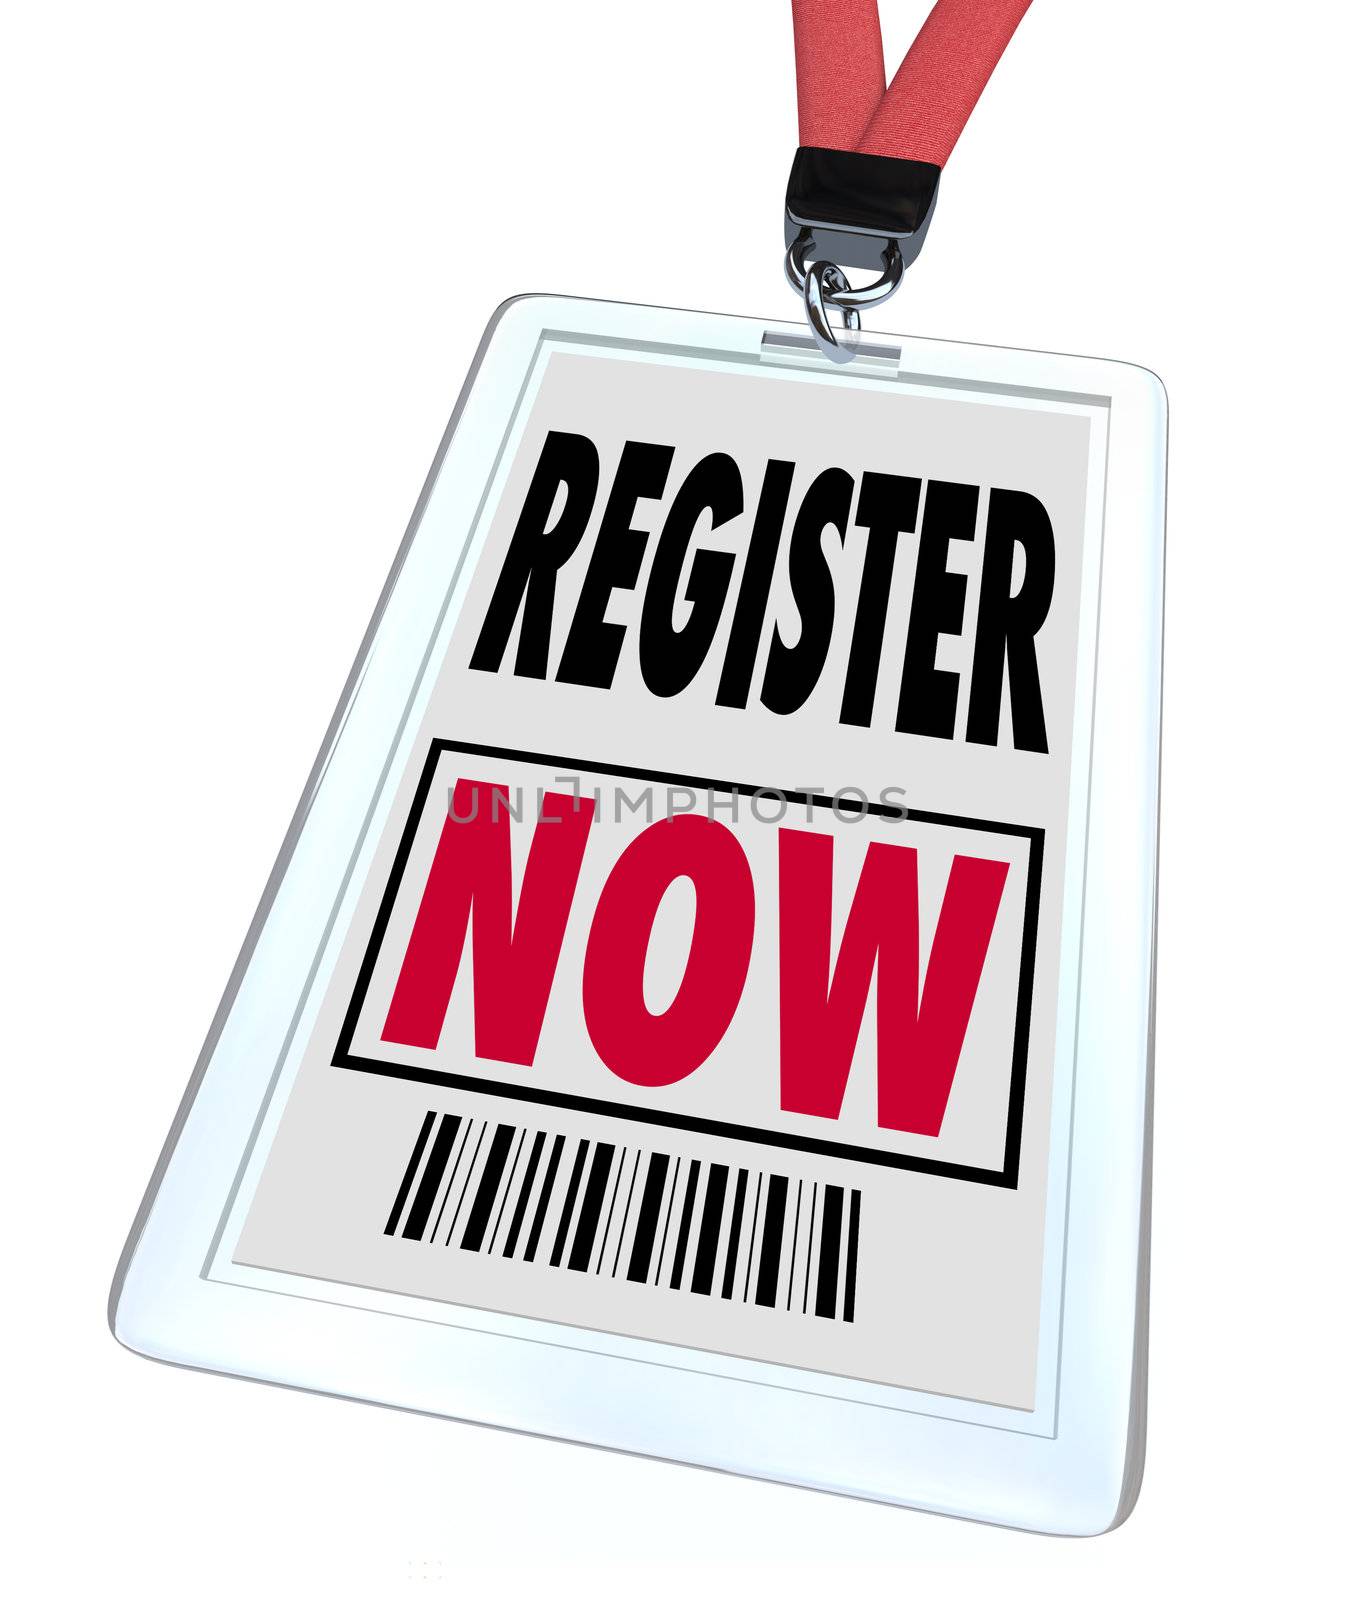 Register Now - Registration for Trade Show Event by iQoncept